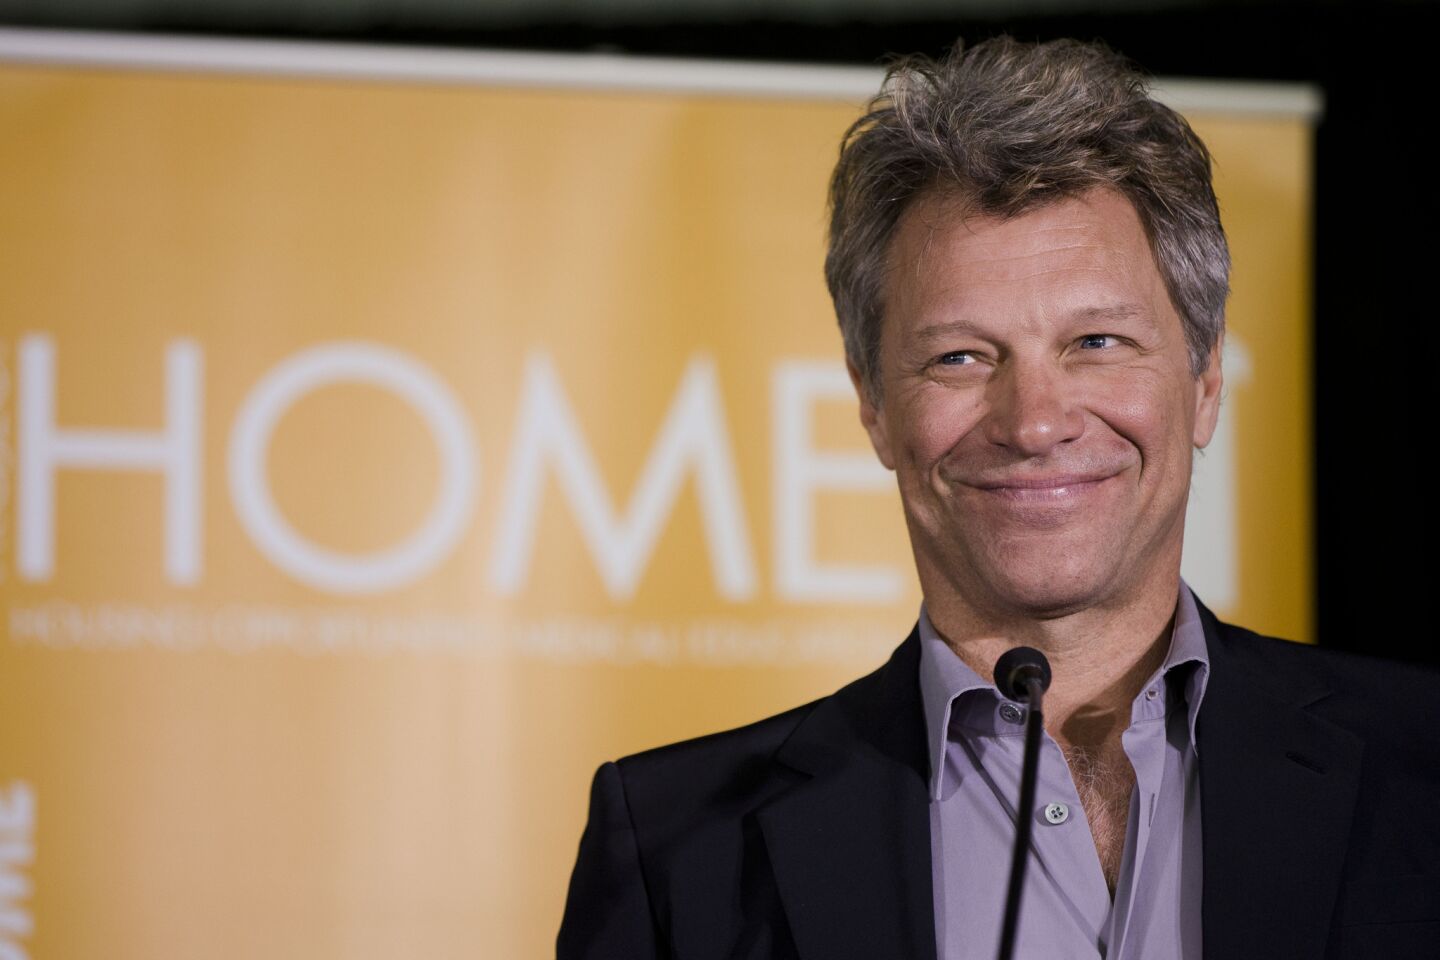 According to a false news report, Jon Bon Jovi was found dead in New Jersey during a 2011 world tour. Bon Jovi confirmed that he was still kicking via Twitter, where he posted a photo of himself holding a sign with the date and a message: "Heaven looks a lot like New Jersey."